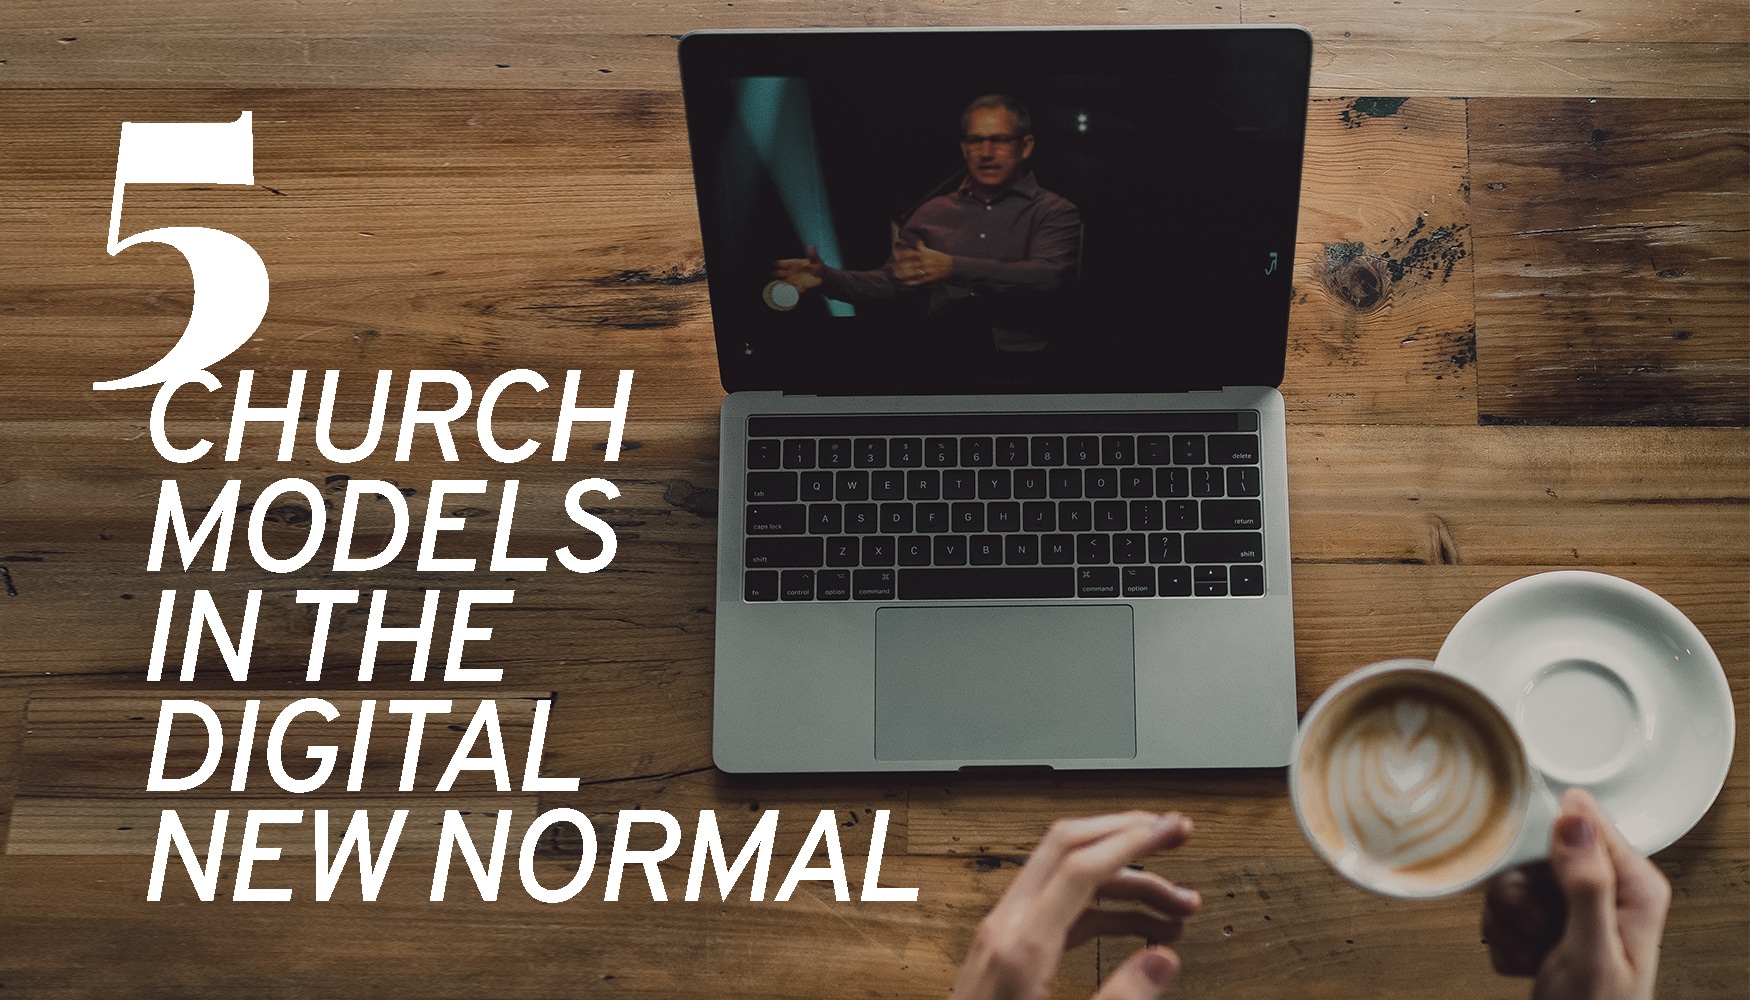 Which of the 5 church models in the digital New Normal is your church? Photo:Nathan Ansell/Unsplash.com